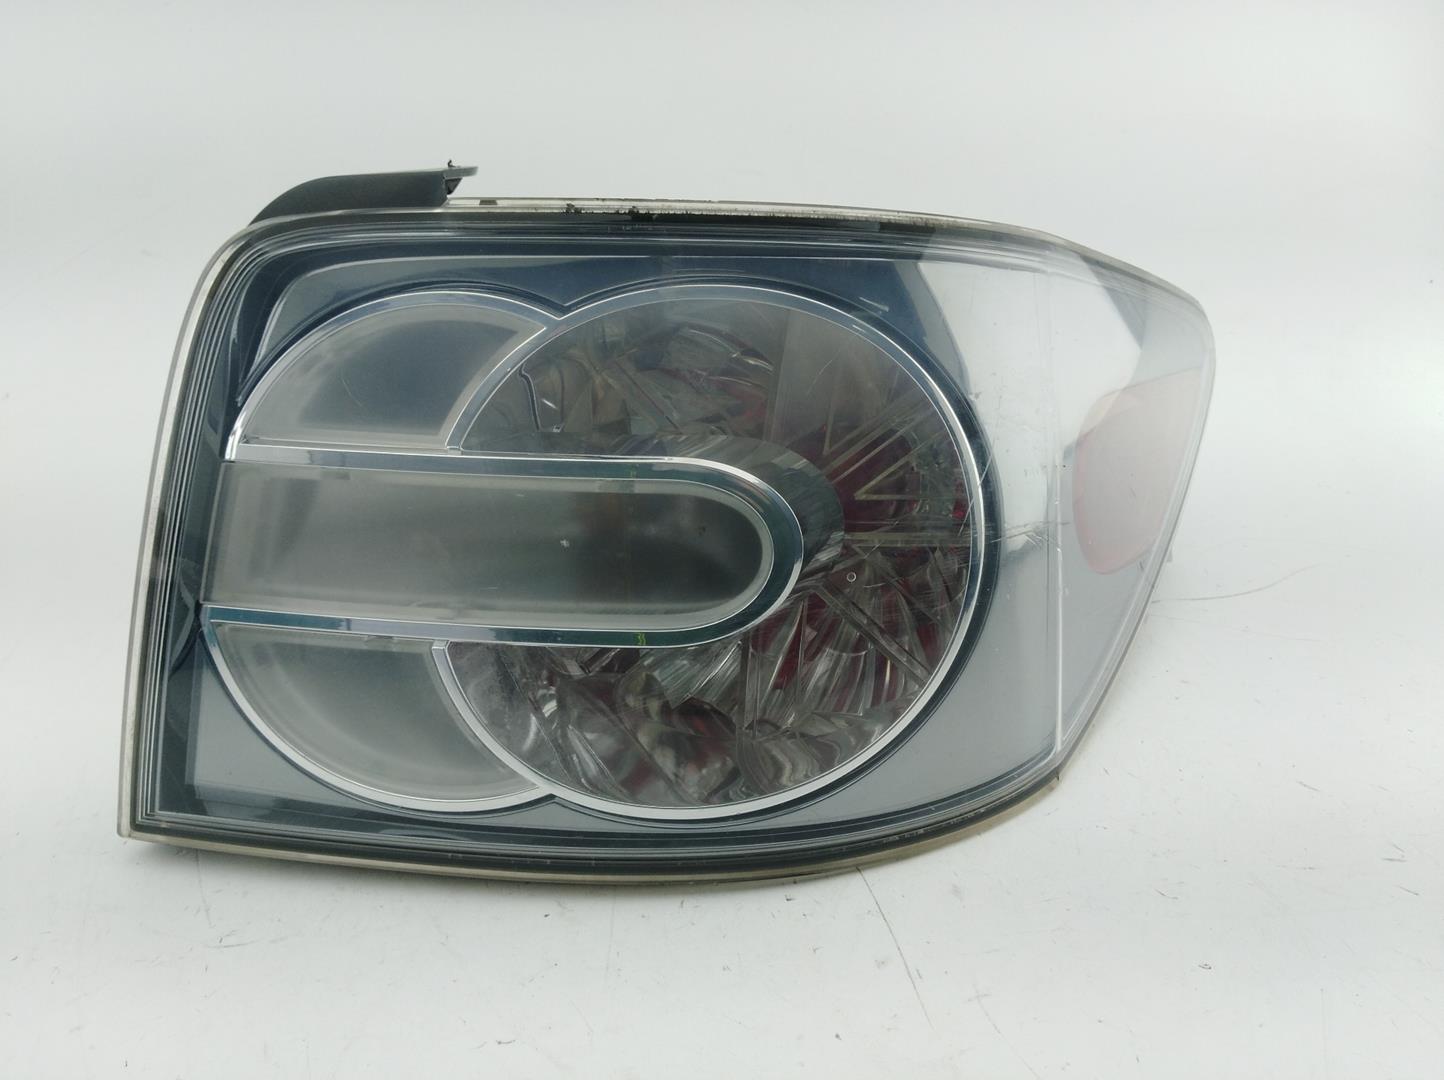 MAZDA CX-7 1 generation (2006-2012) Rear Right Taillight Lamp EH6251150H, EH6251150H, EH6251150H 24666483